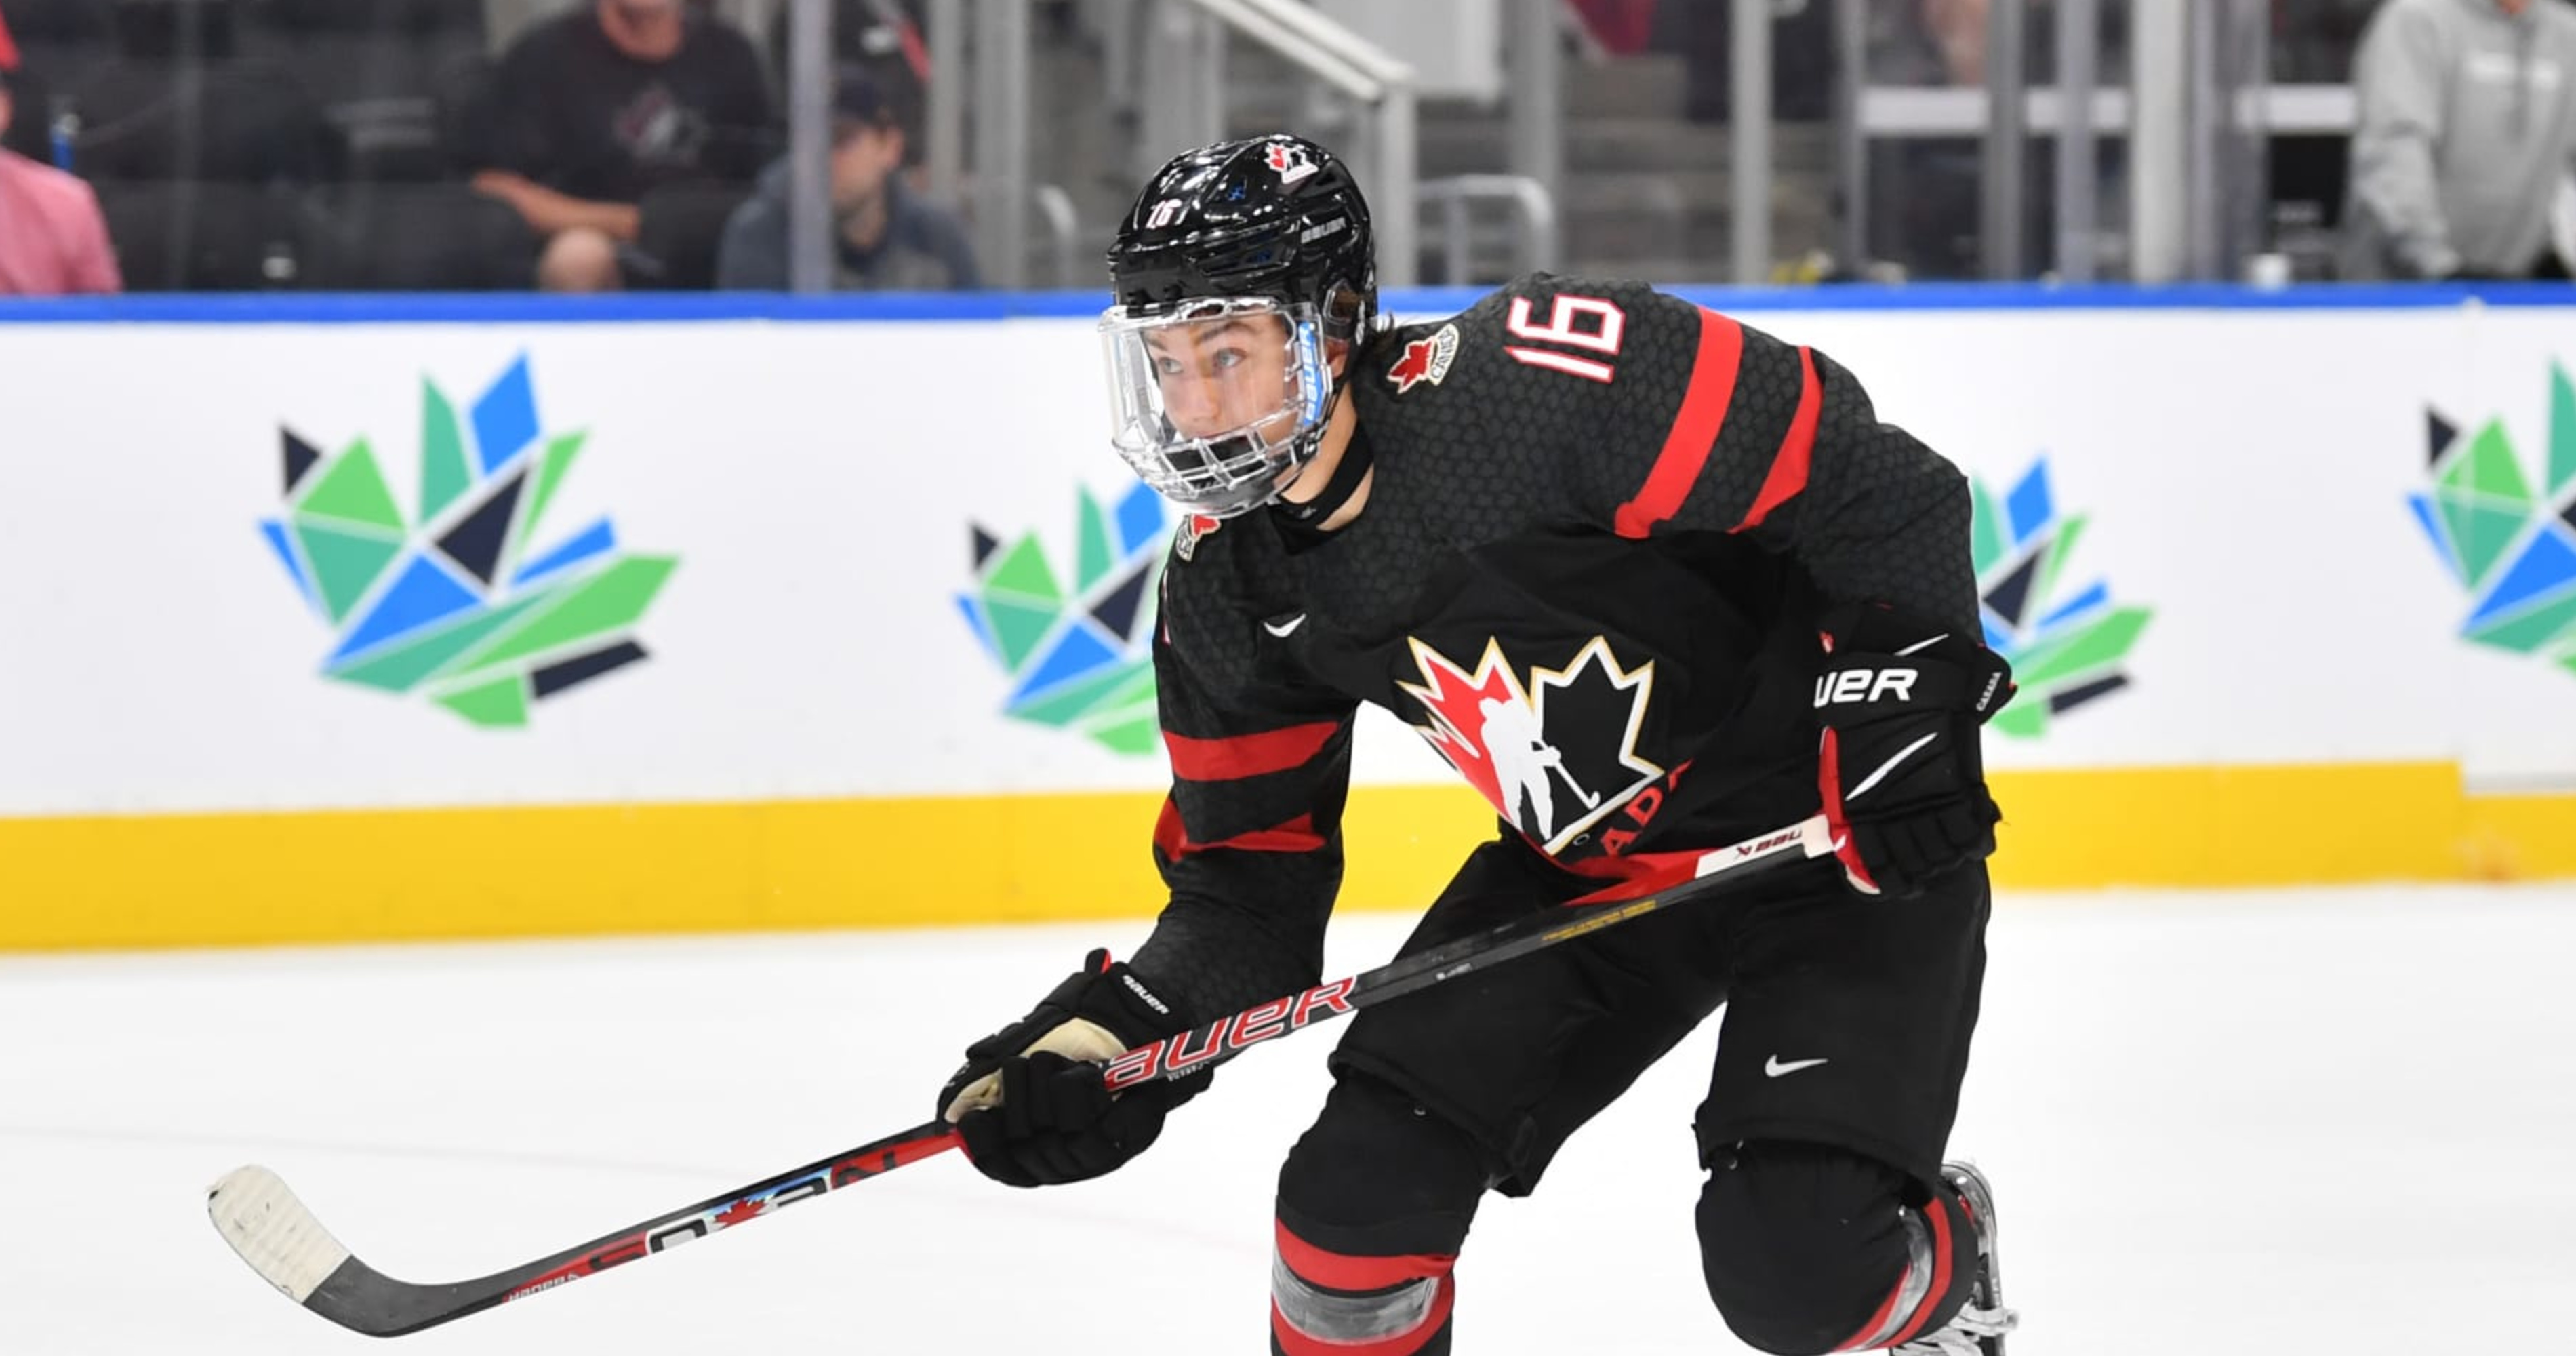 Bedard has 7 points as Canada finds form at world juniors with 11